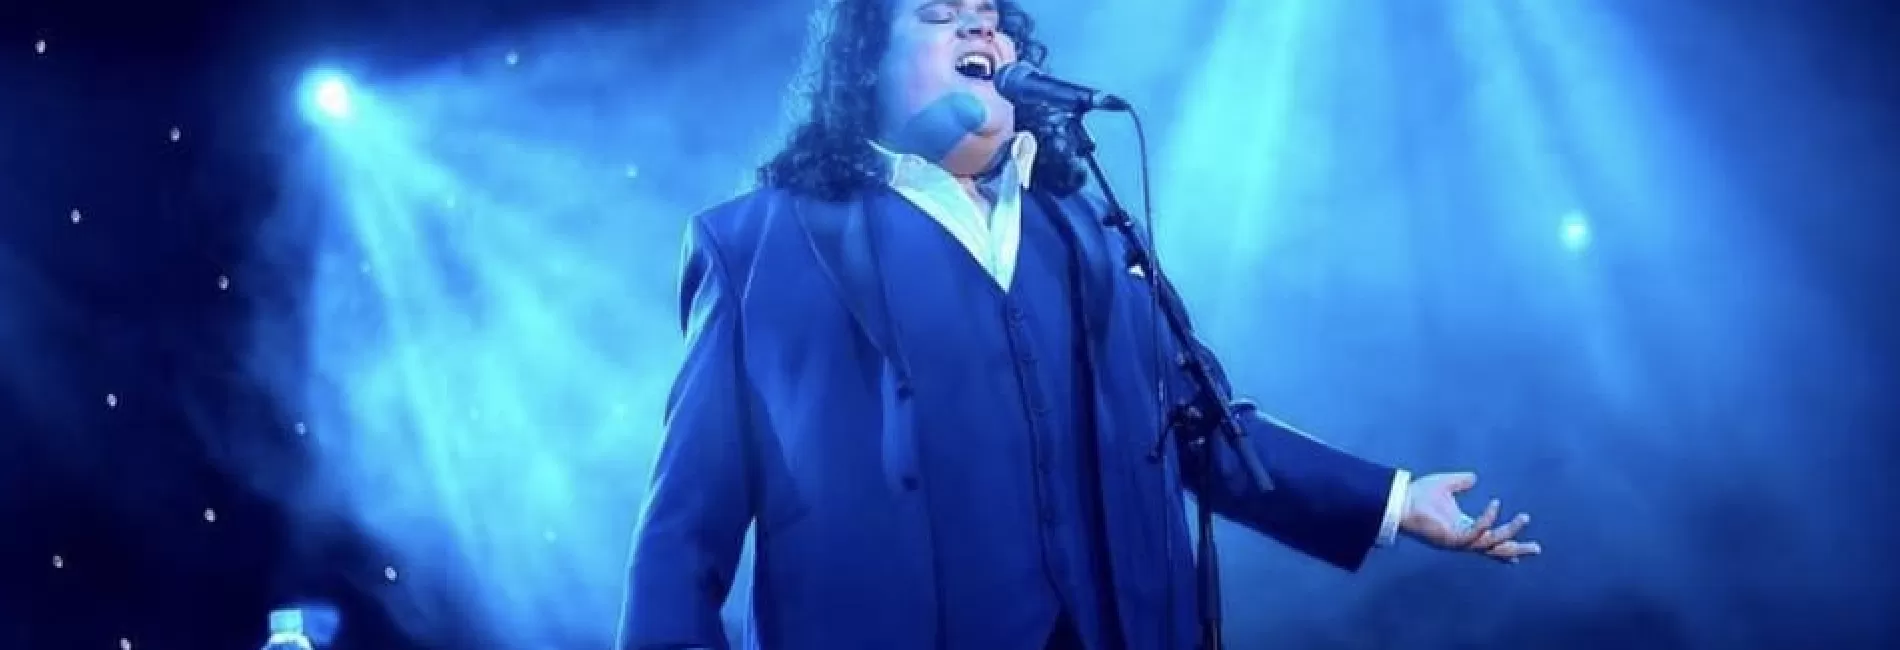 INTERVIEW WITH GUEST SOLOIST JONATHAN ANTOINE